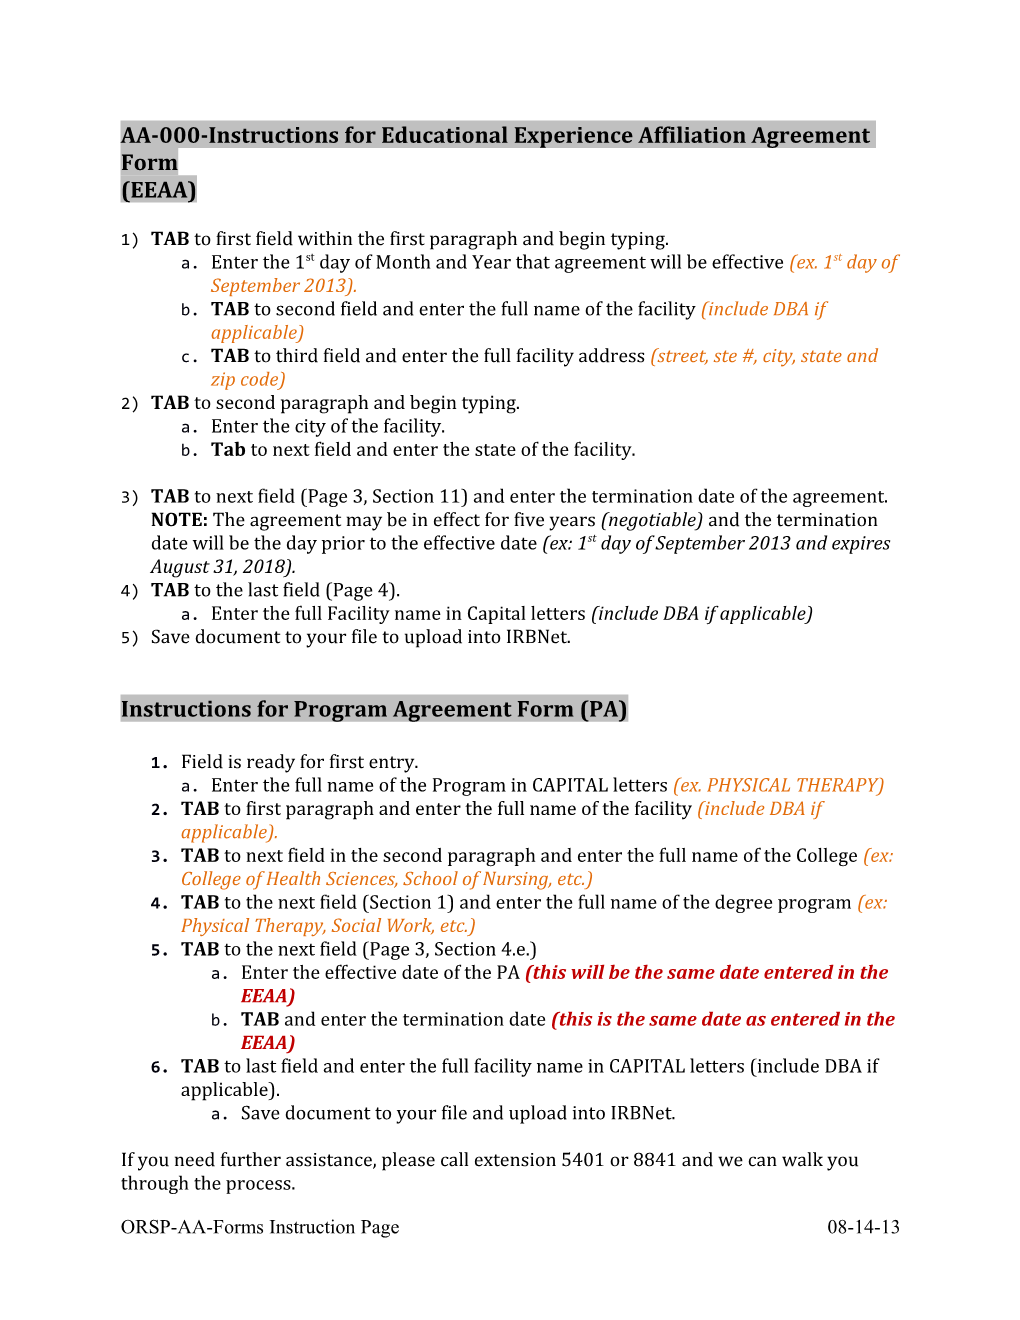 AA-000-Instructions for Educational Experience Affiliation Agreement Form